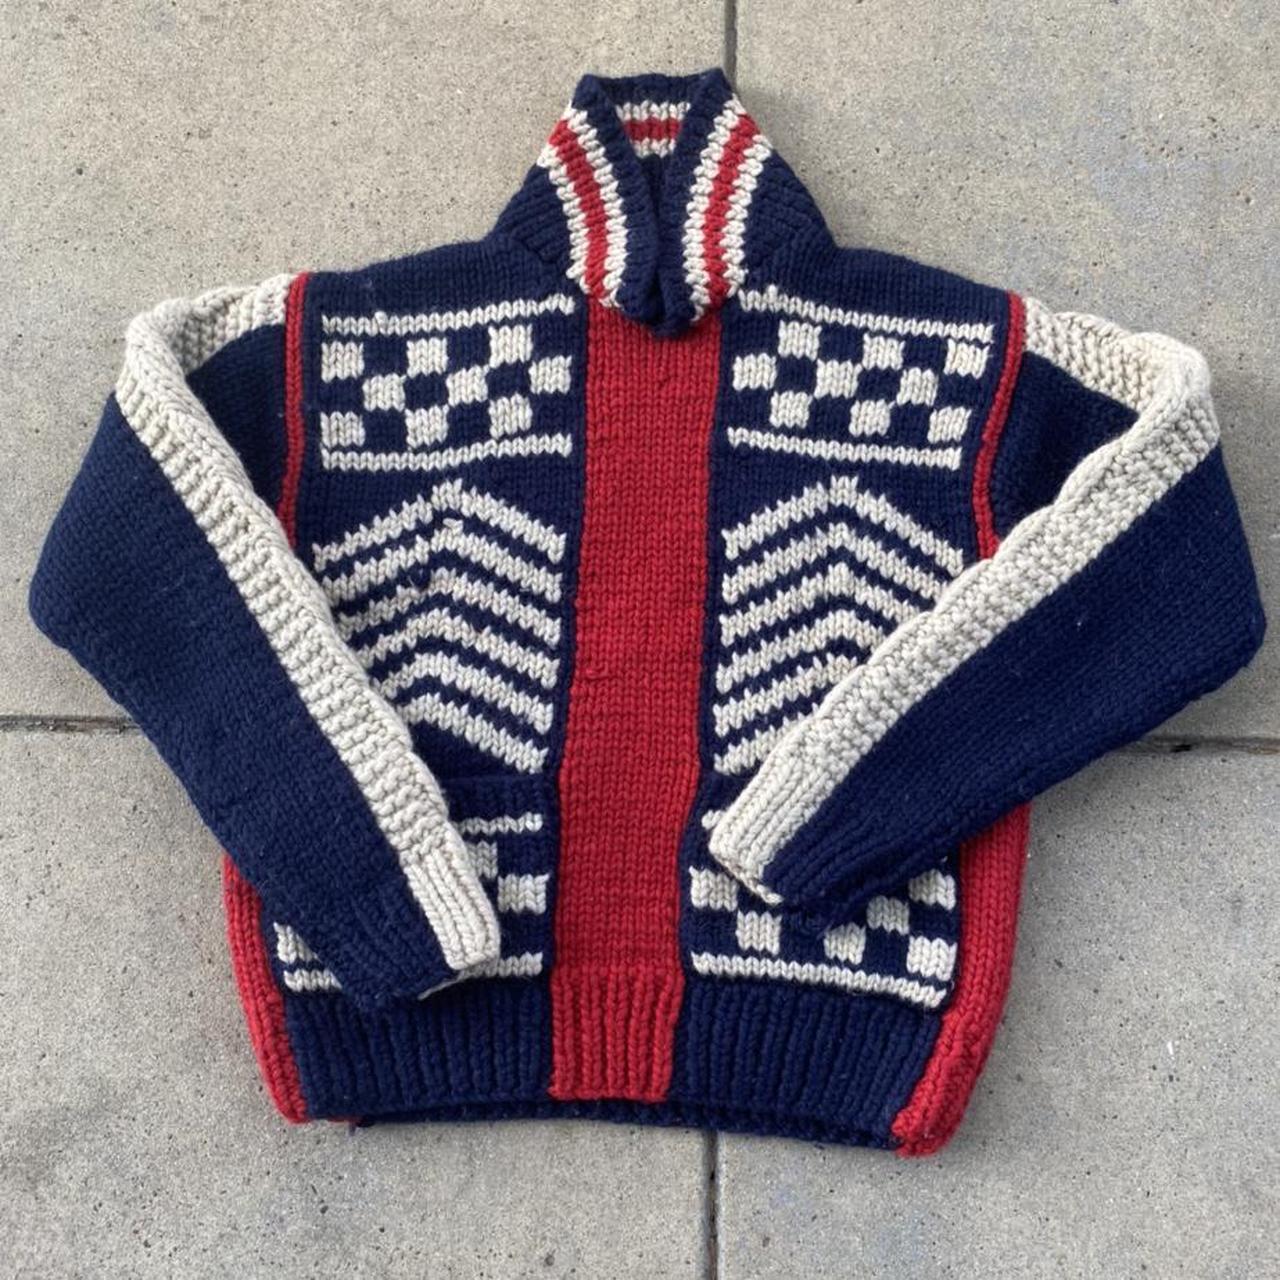 Vintage Hysteric Glamour Knit Sweater Cardigan... - Depop